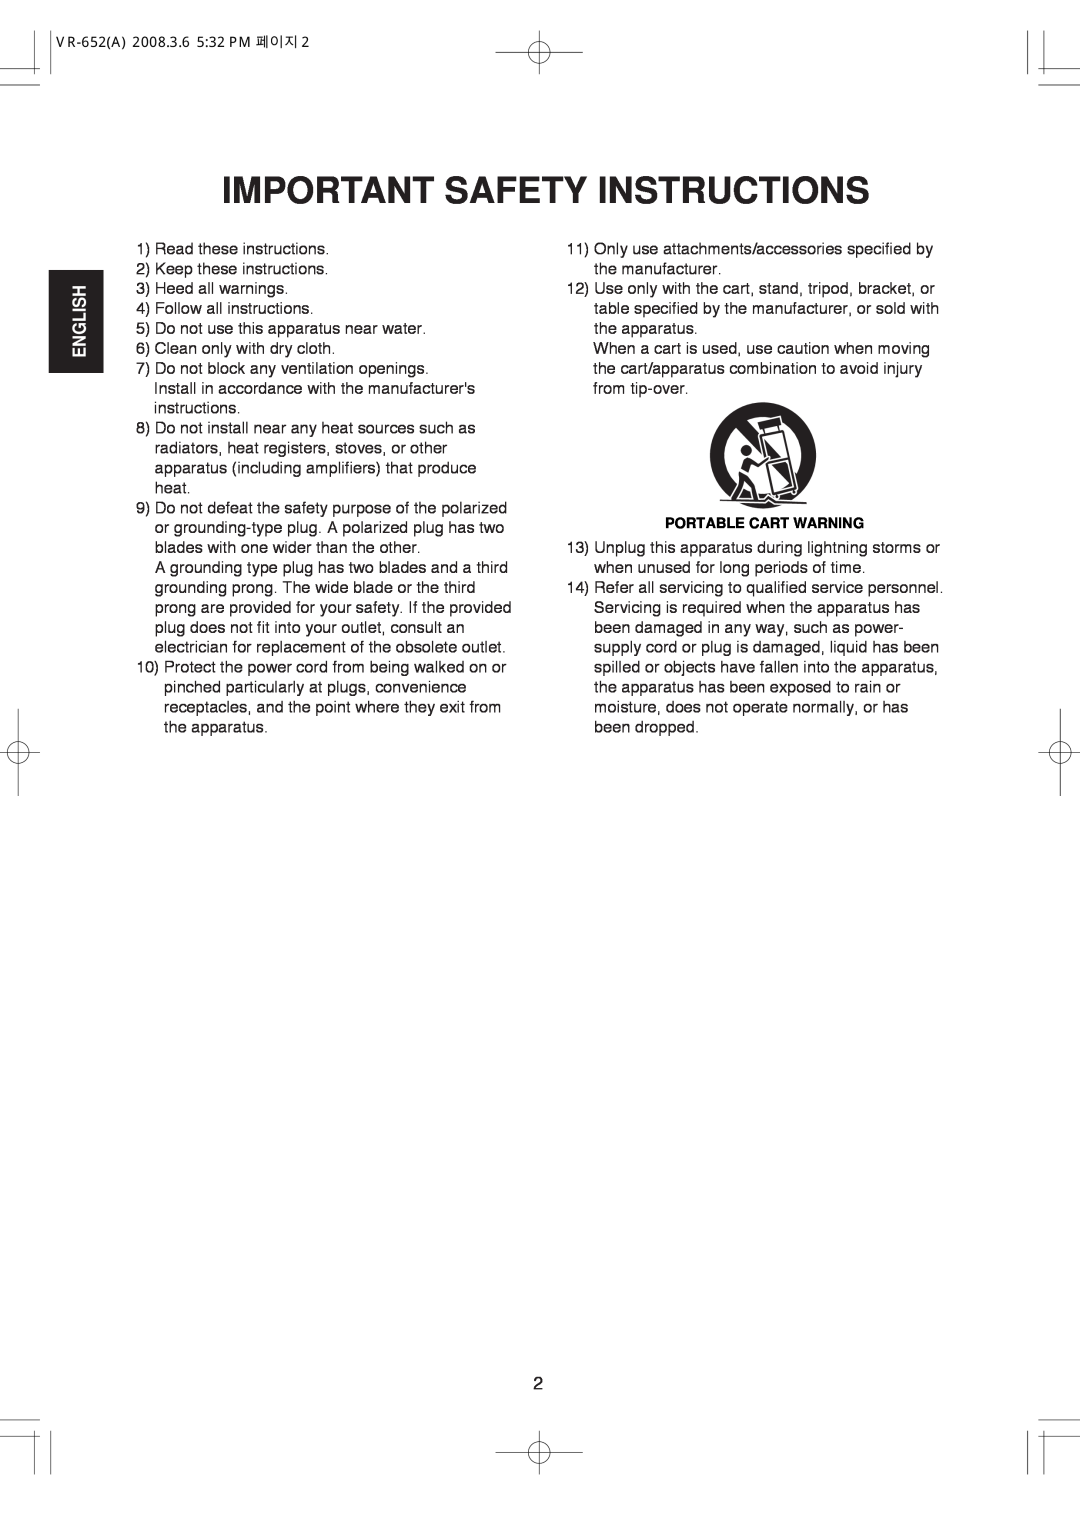 Hollywood VR-652 manual English, Important Safety Instructions 